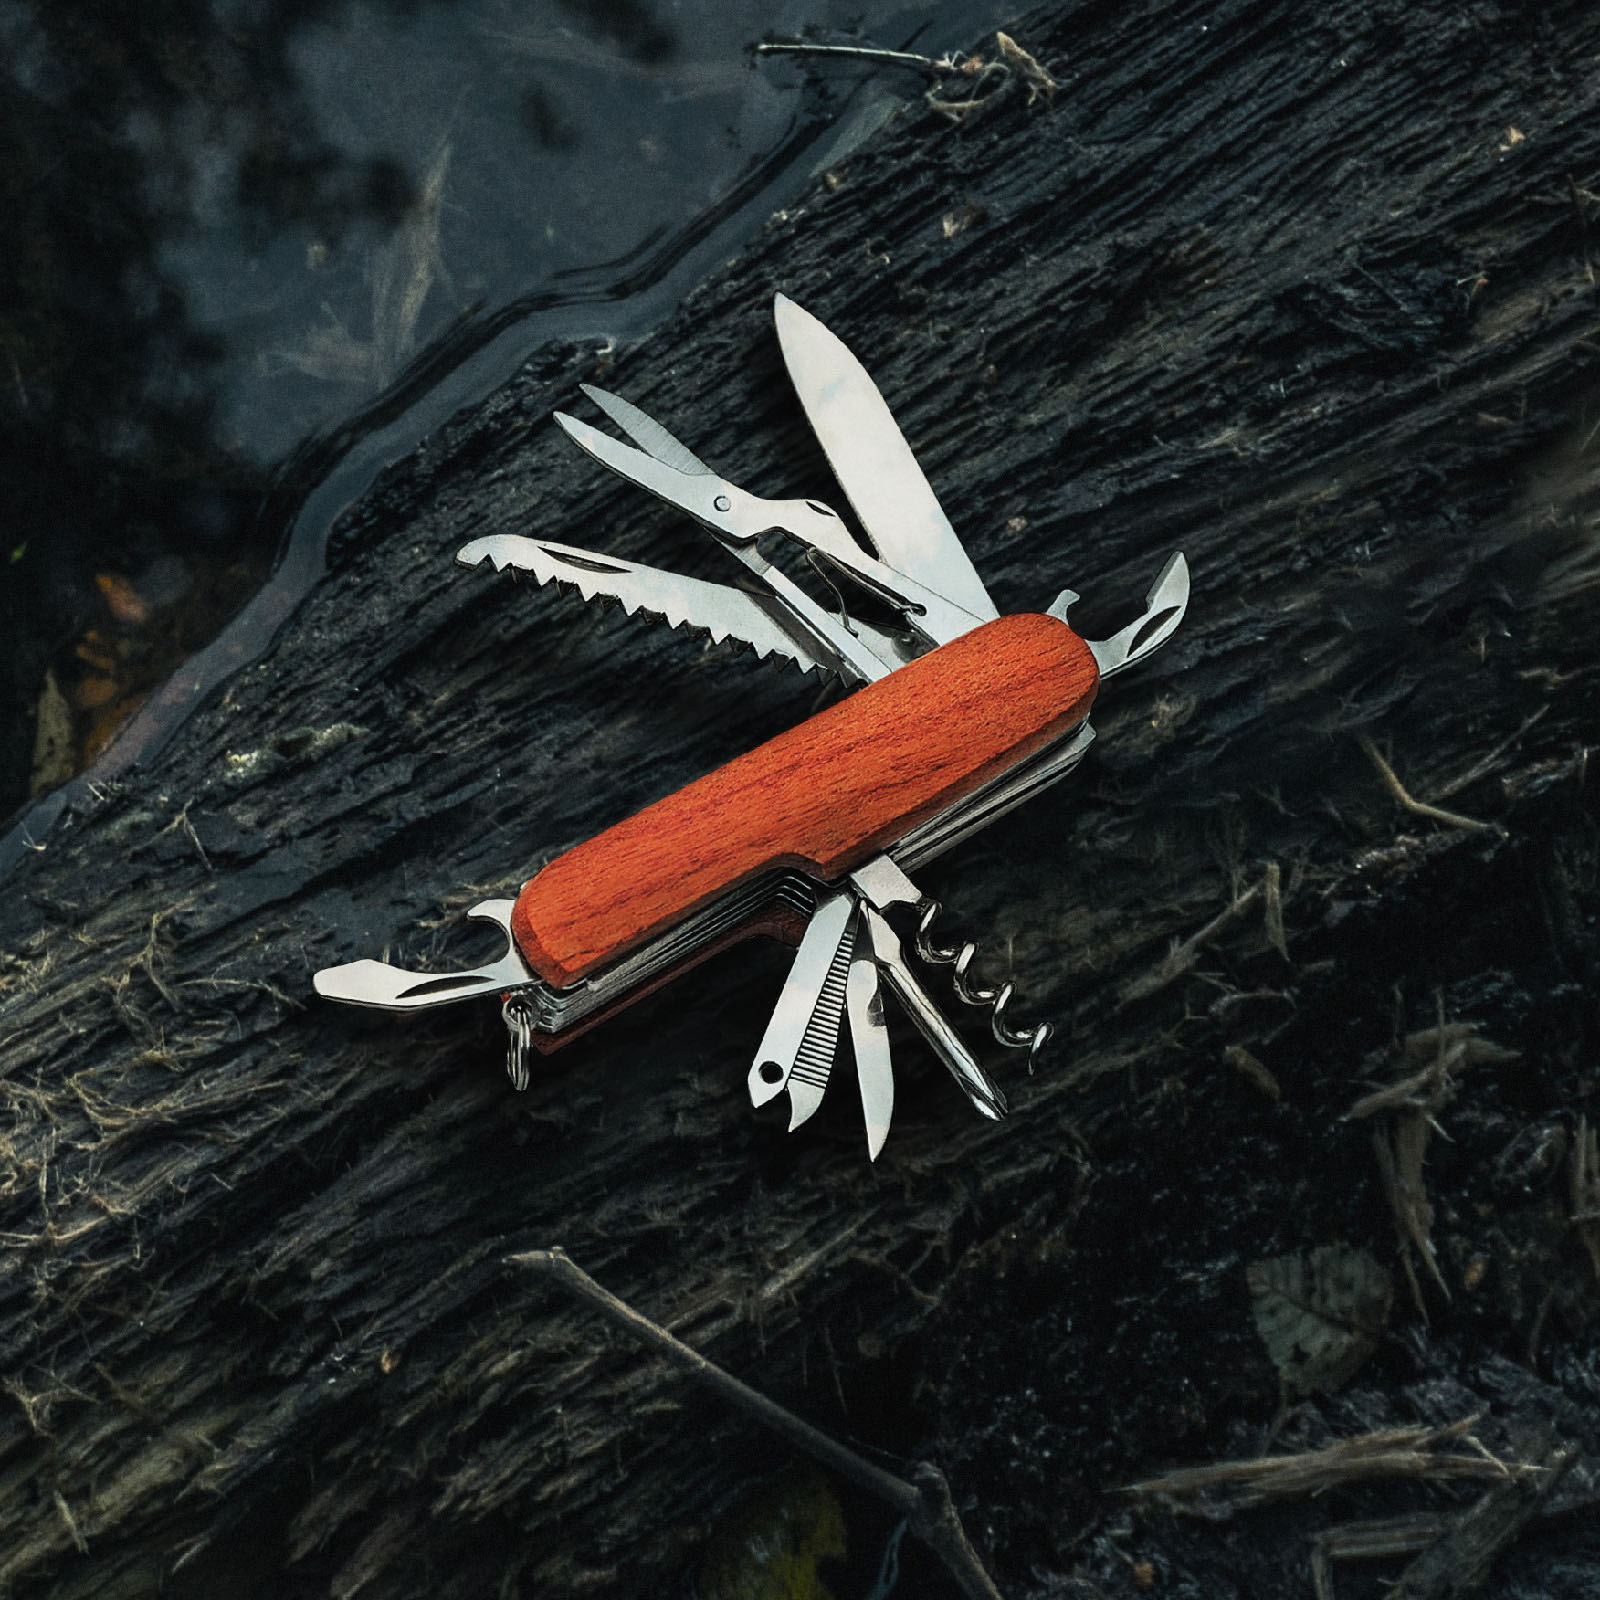 Stylish Swiss army pocket knife, perfect for outdoor and survival